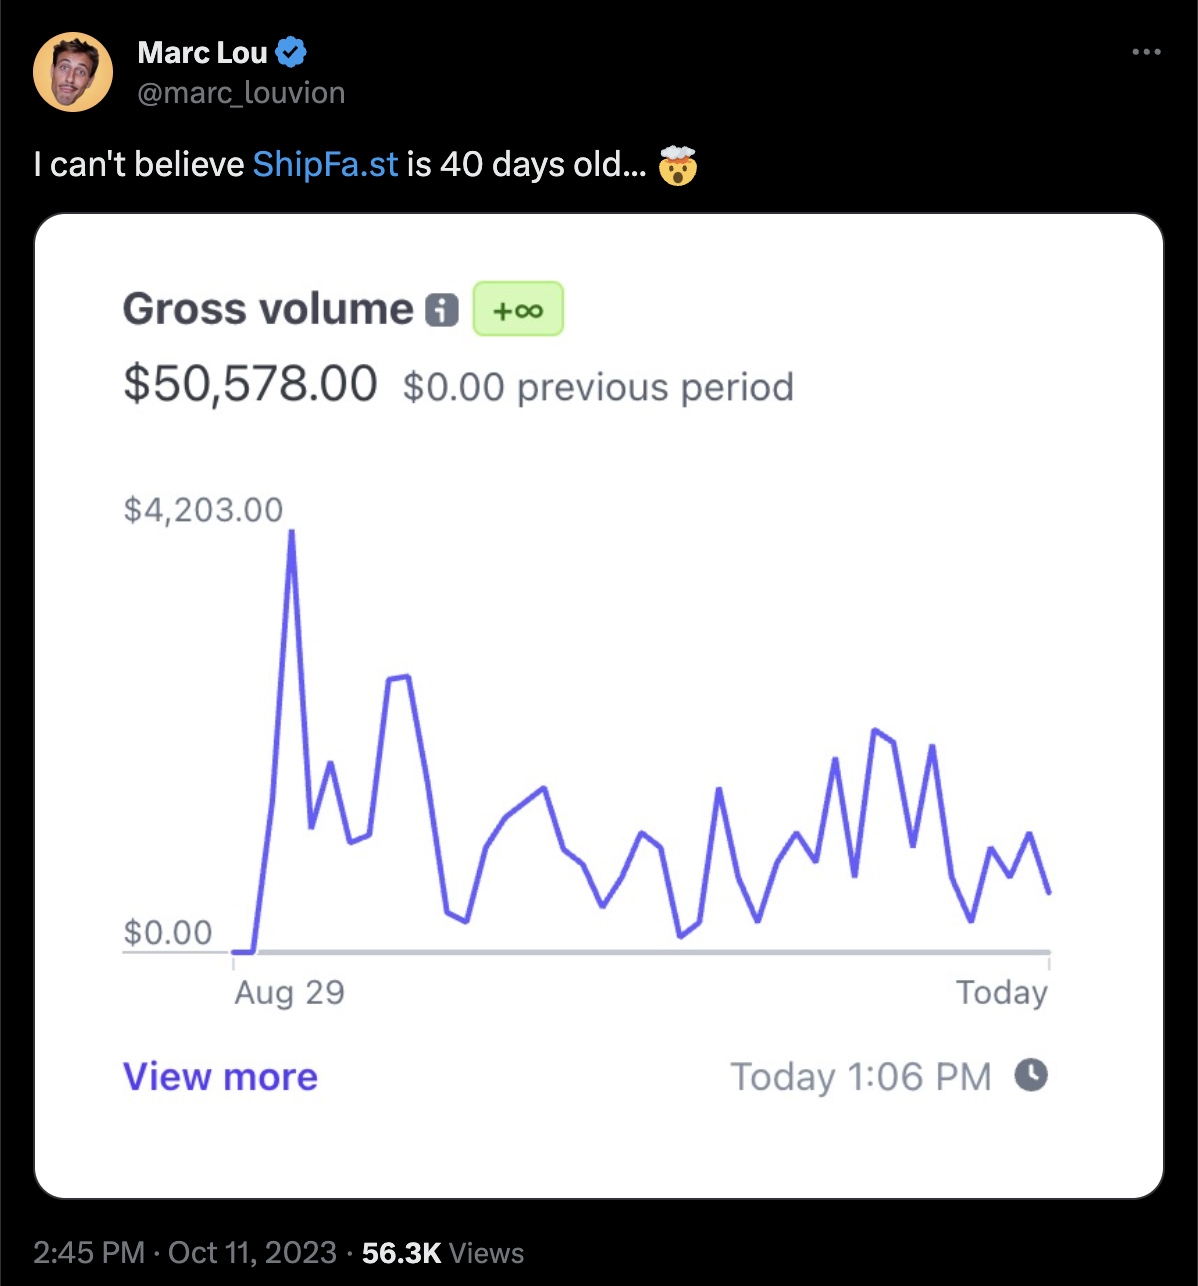 Tweet by Marc: I can't believe http://ShipFa.st is 40 days old... 🤯 (showing $50k MRR)